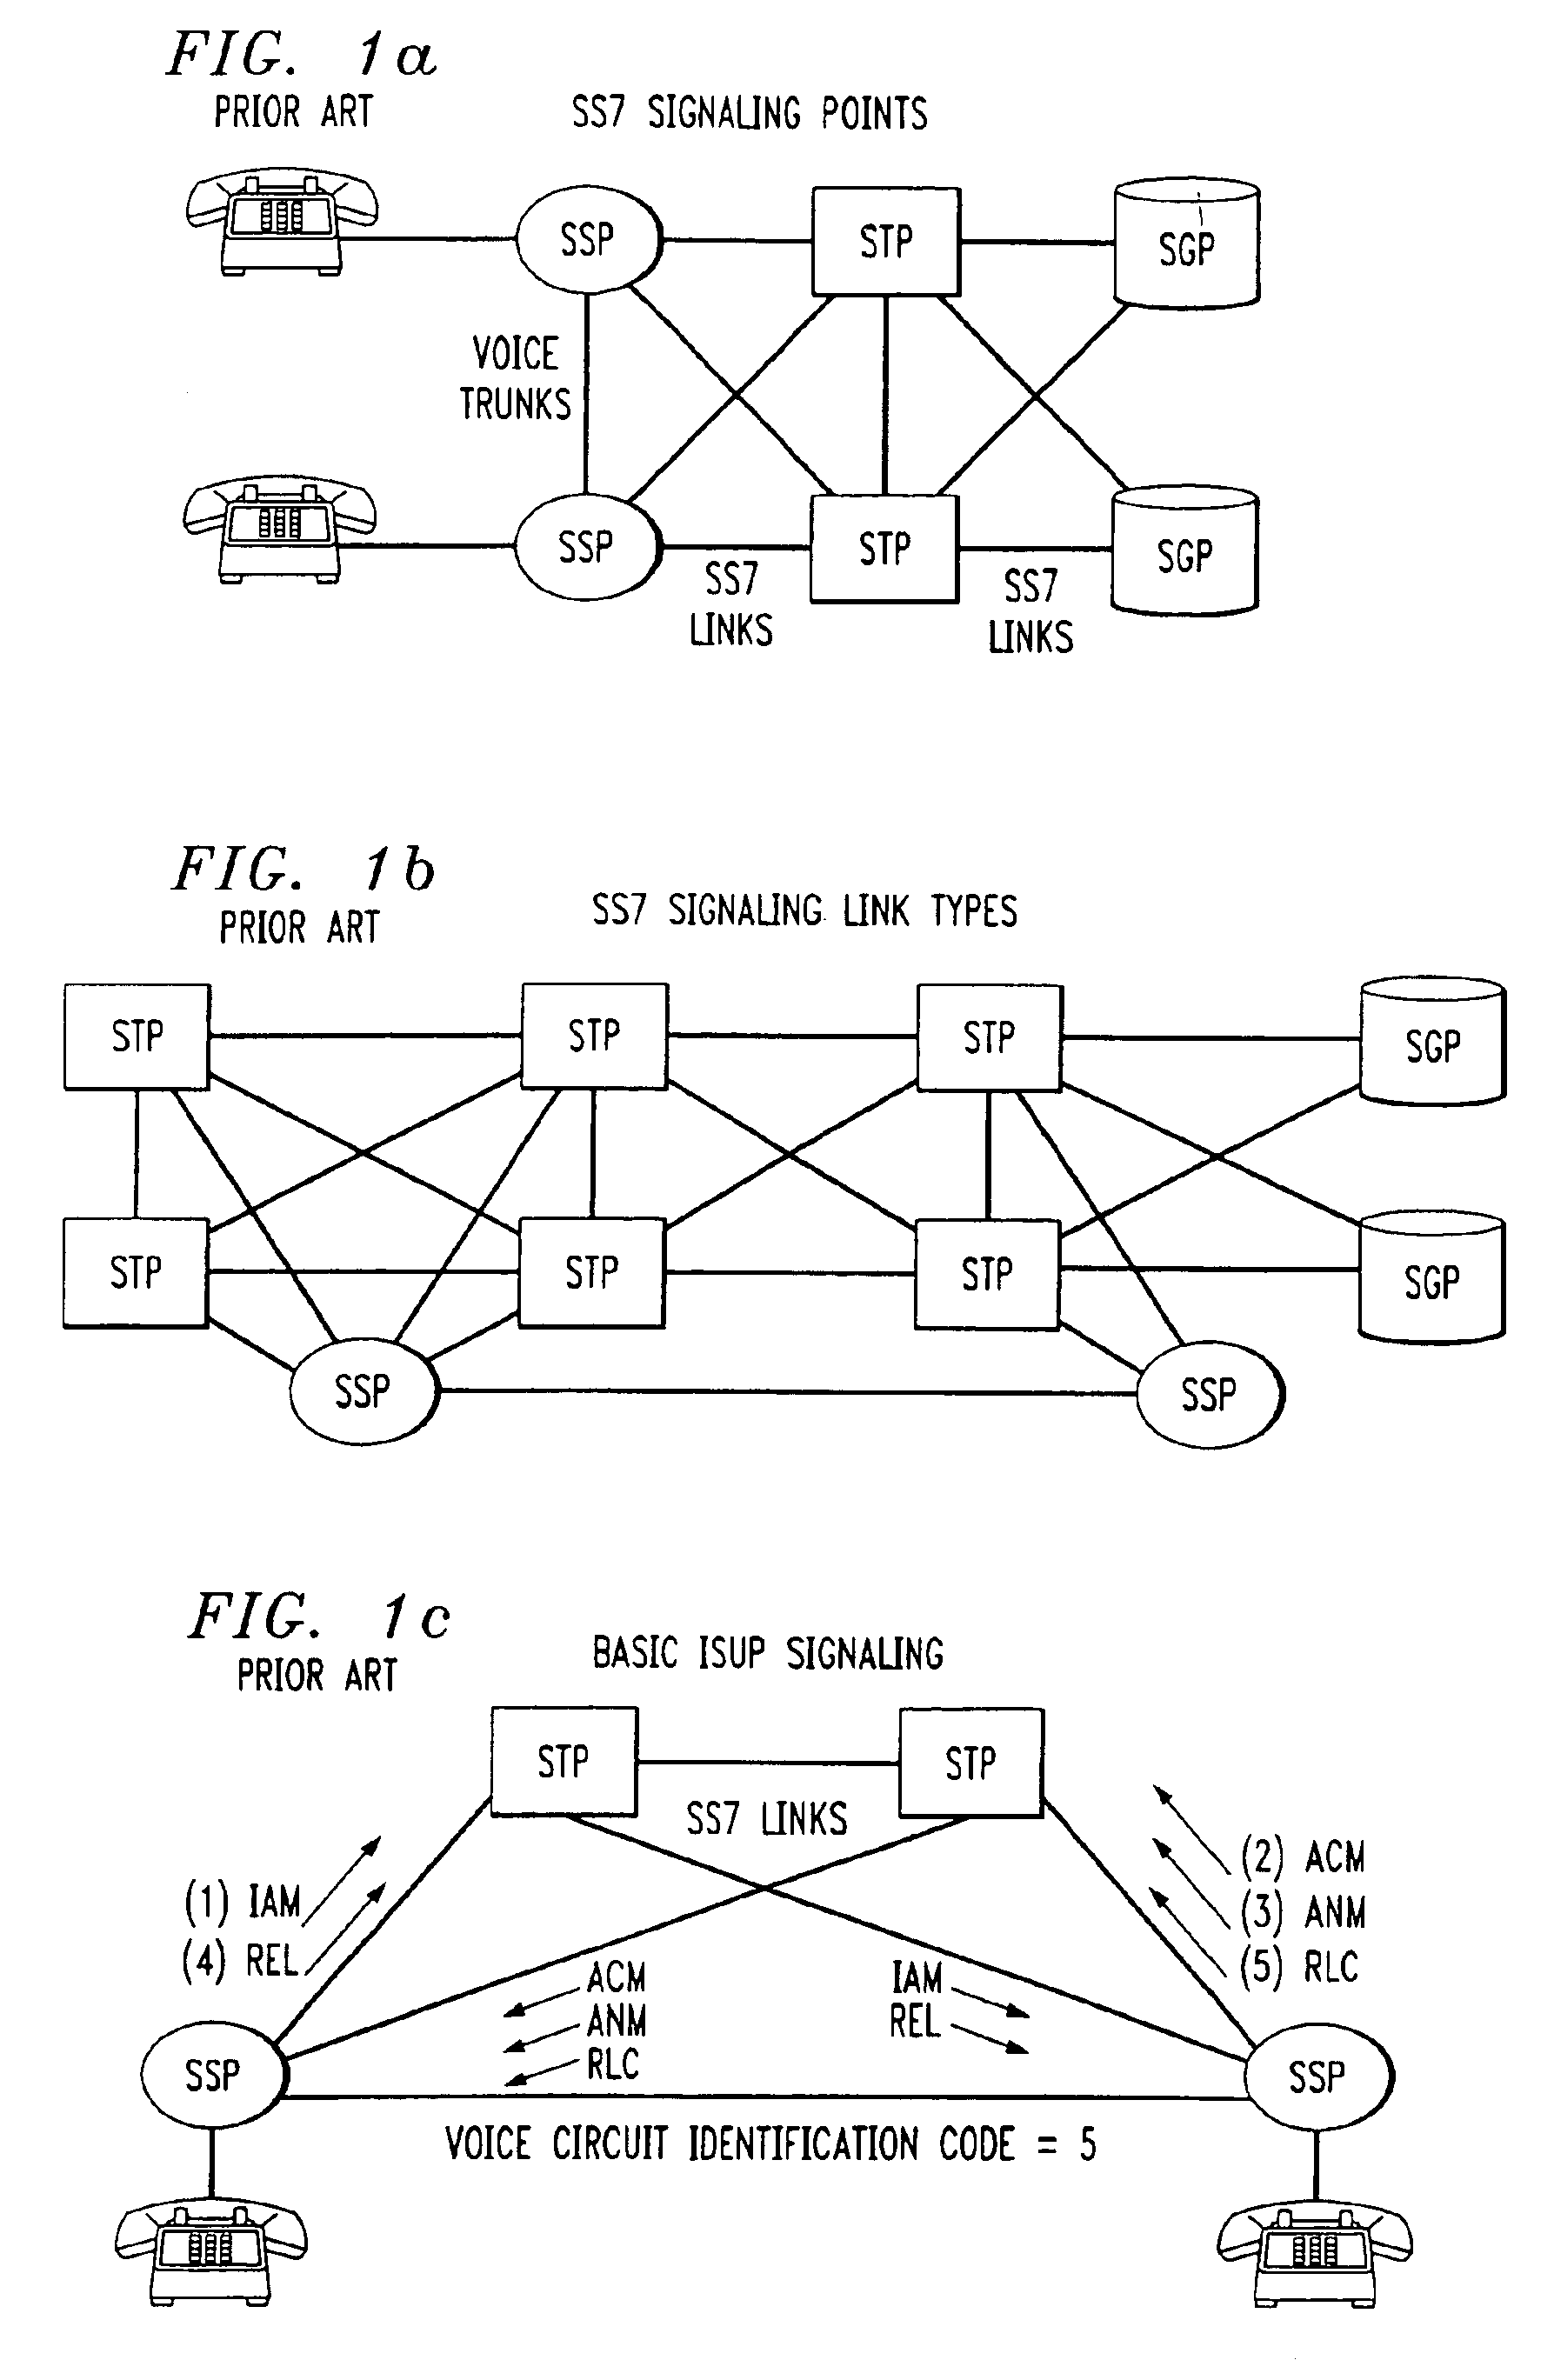 Method for providing enhanced directory assistance upon command using out-of-band signaling